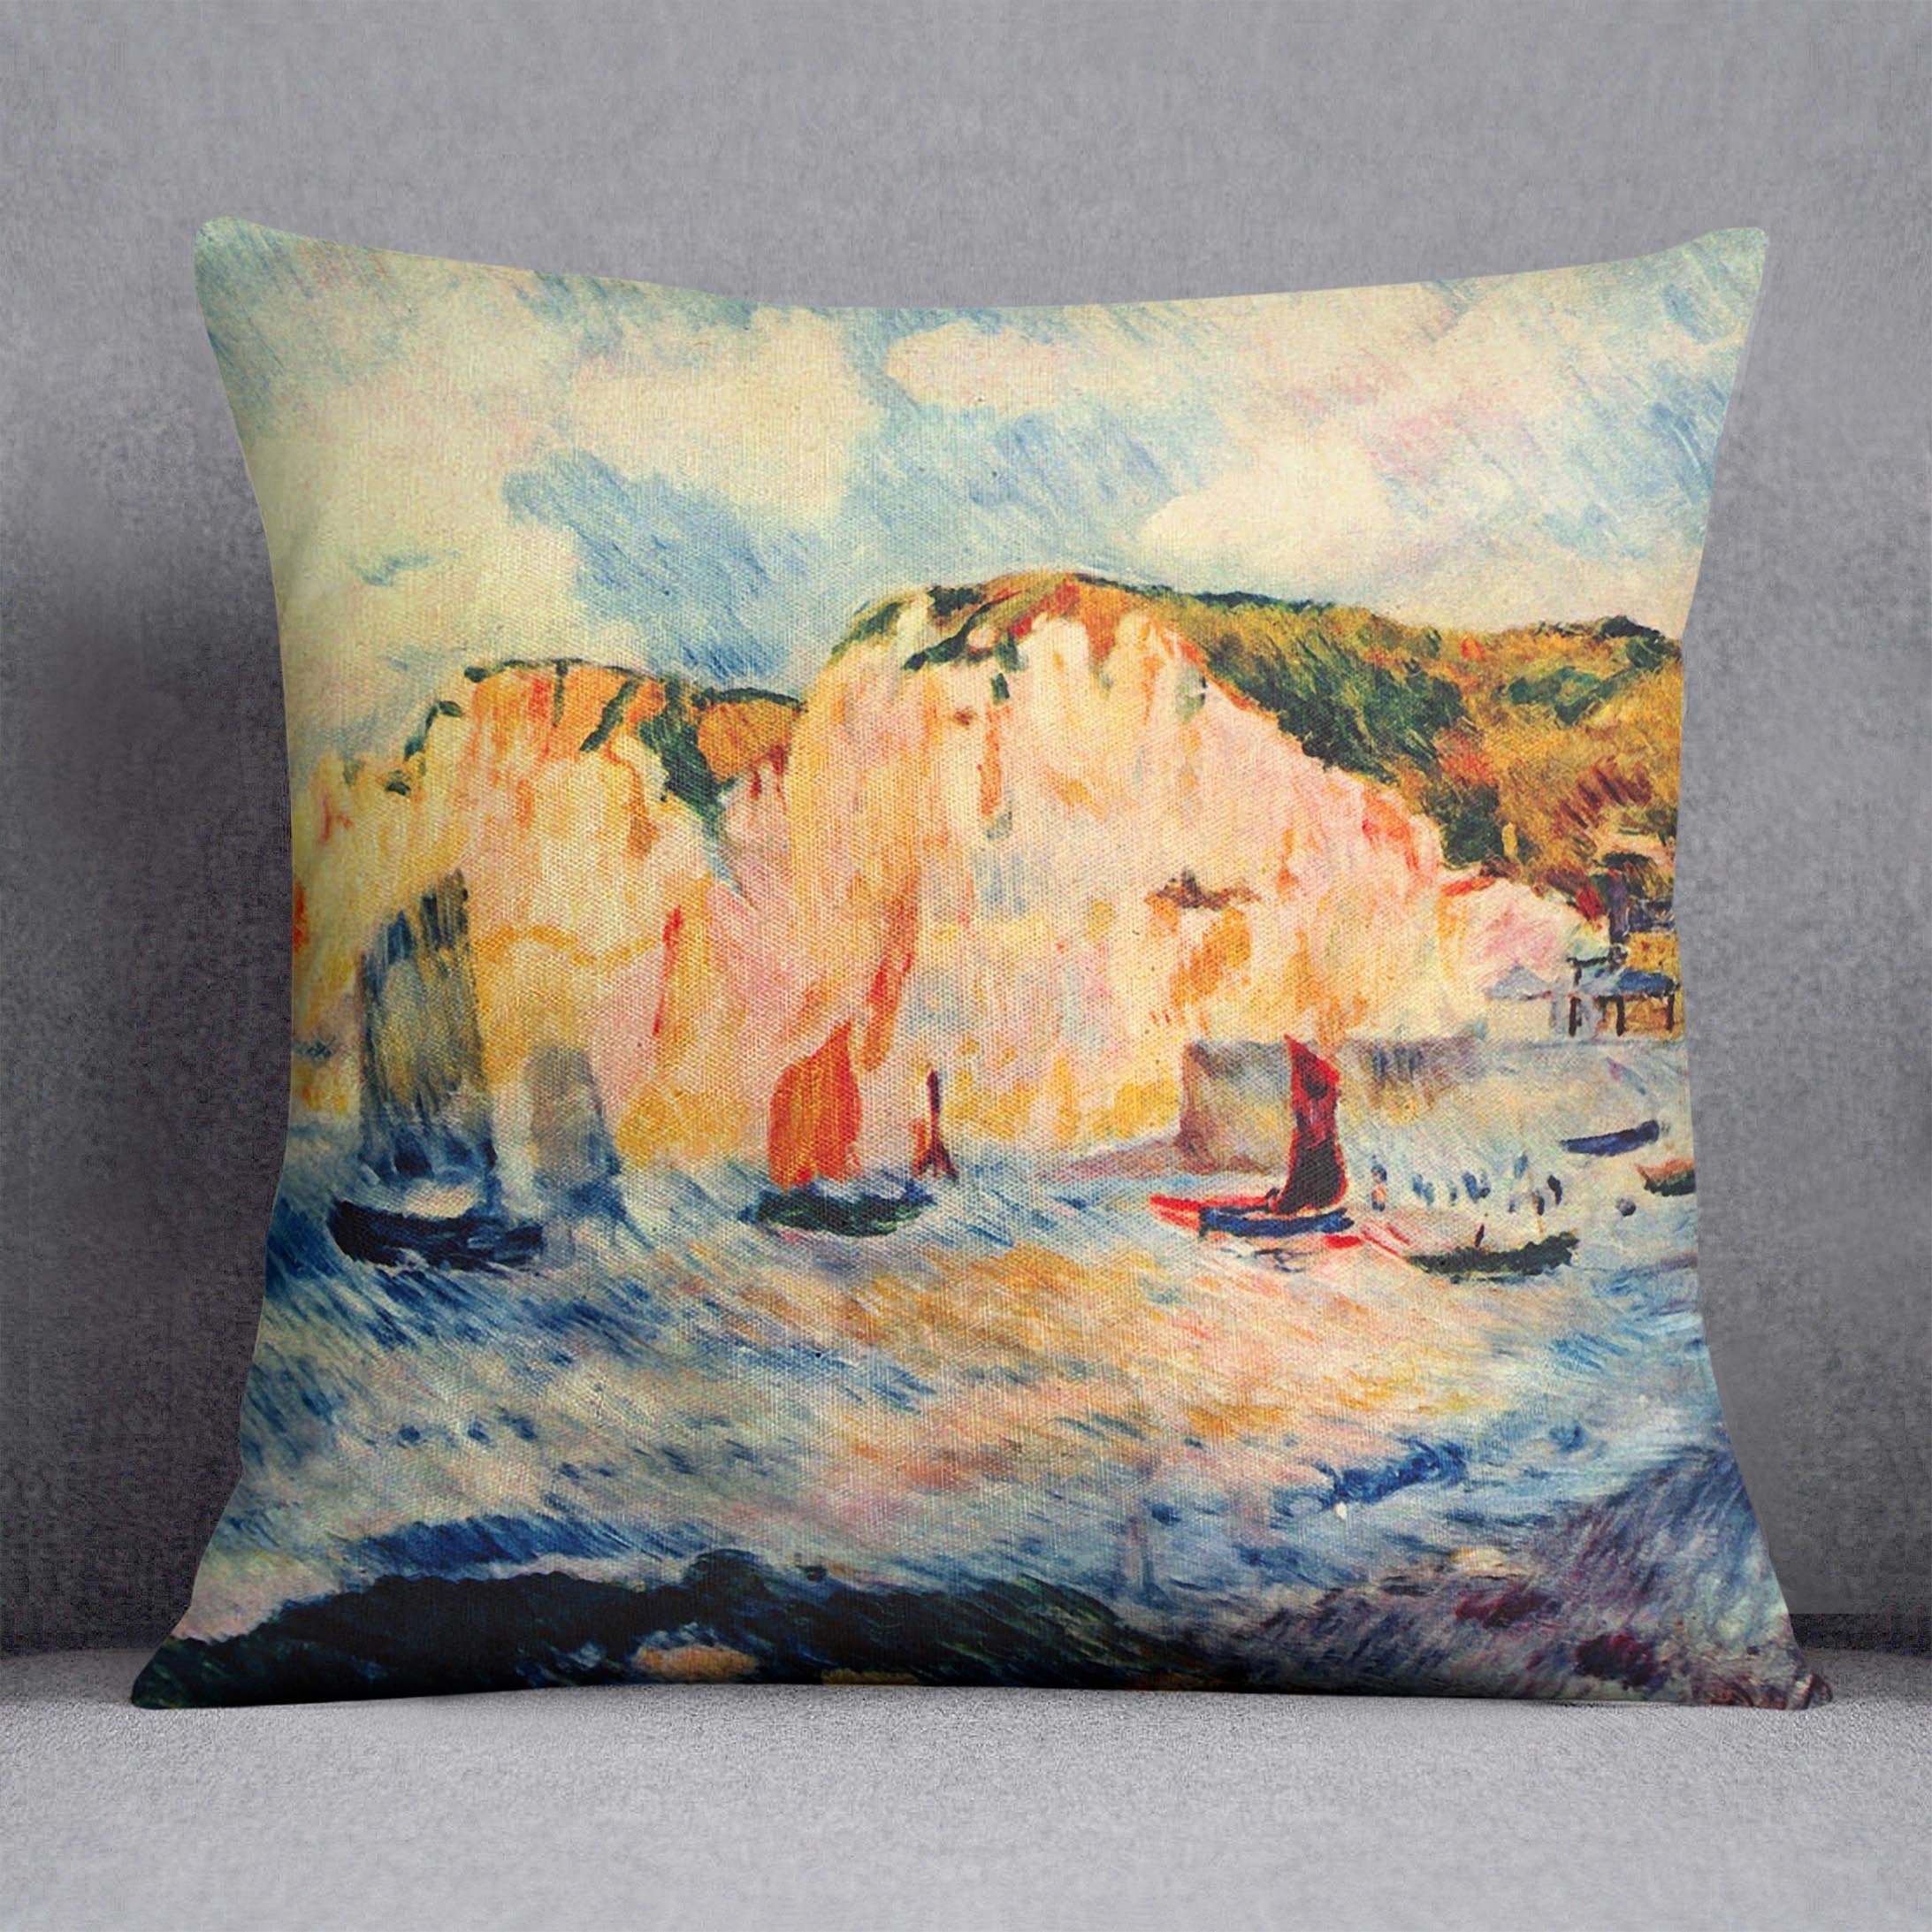 Sea and cliffs by Renoir Throw Pillow